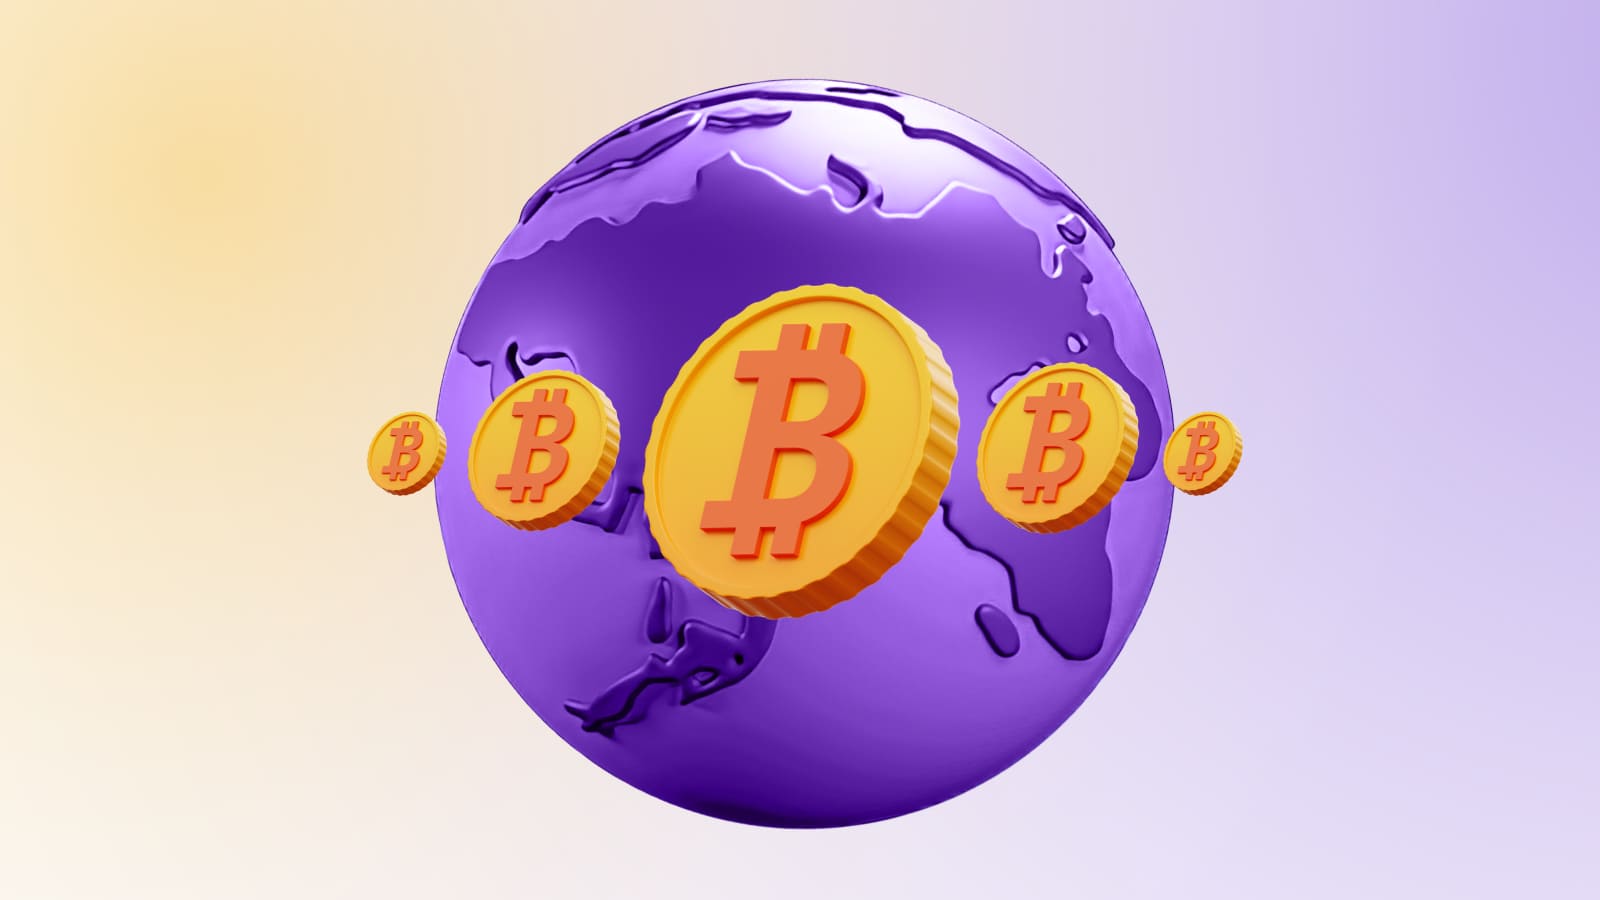 Connecting a cryptocurrency payment system enables global trade without currency conversion.